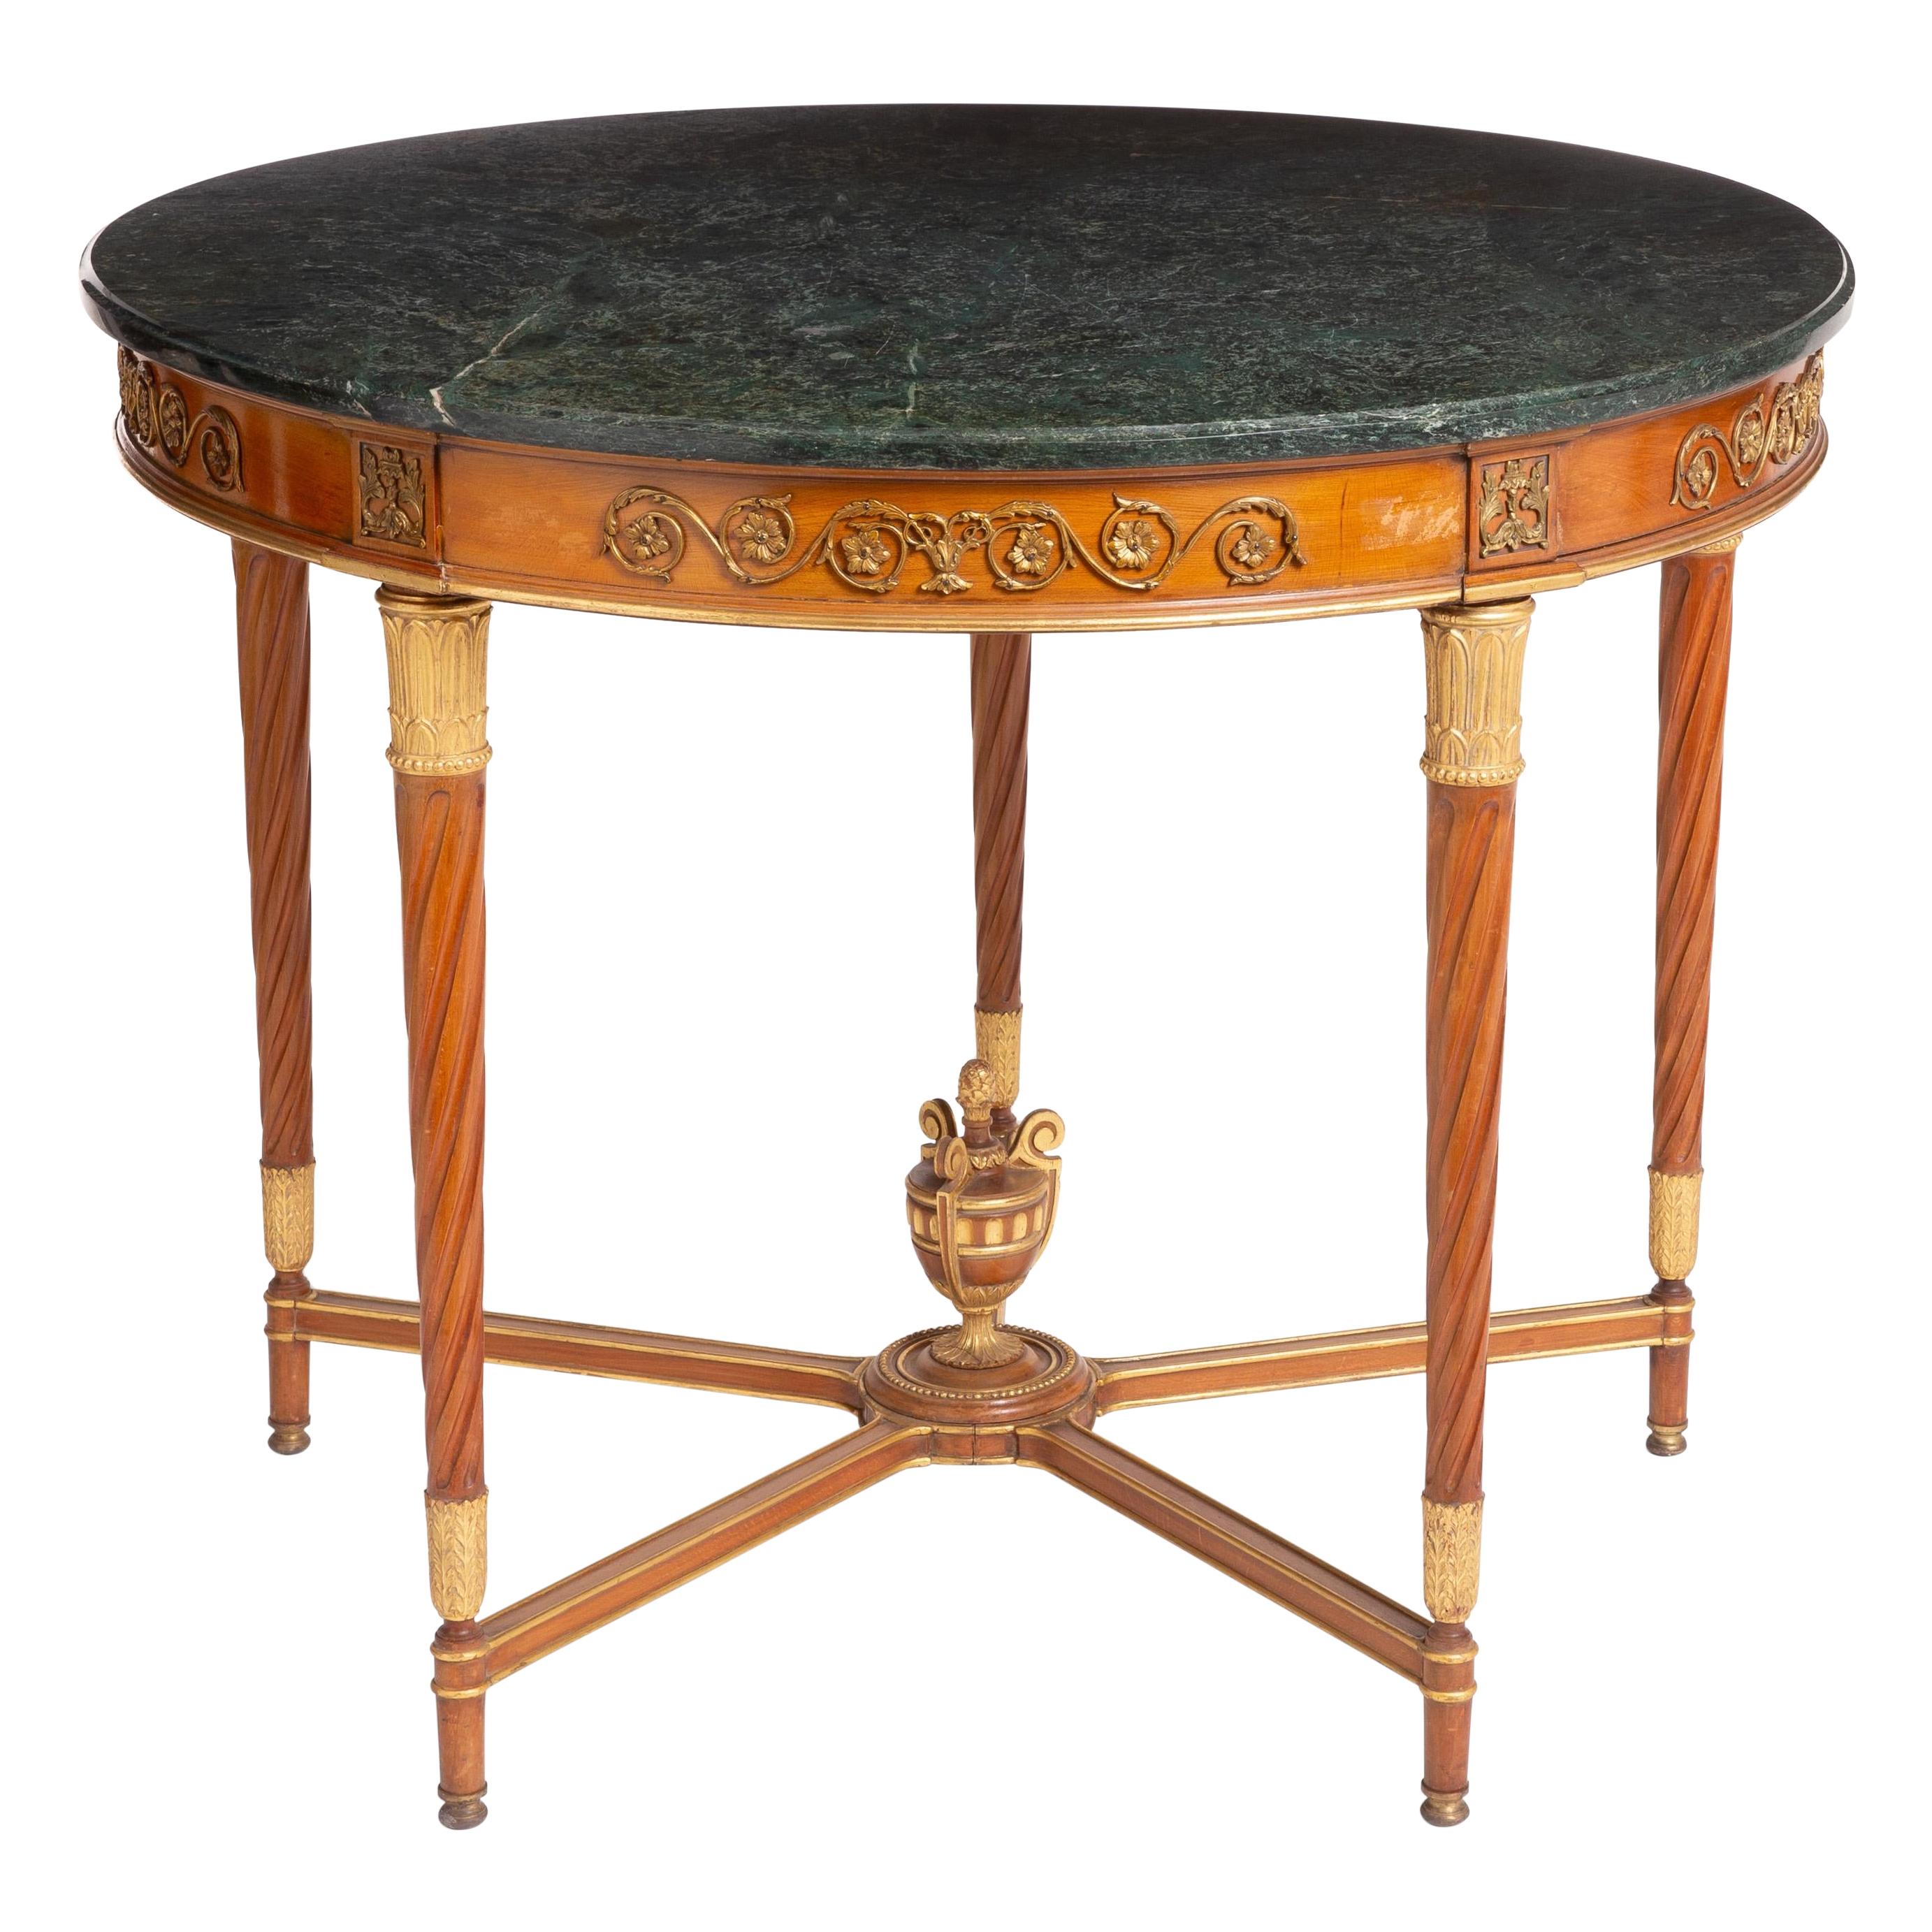 French Gilt Bronze Mounted Fruitwood Center Table, circa 1900